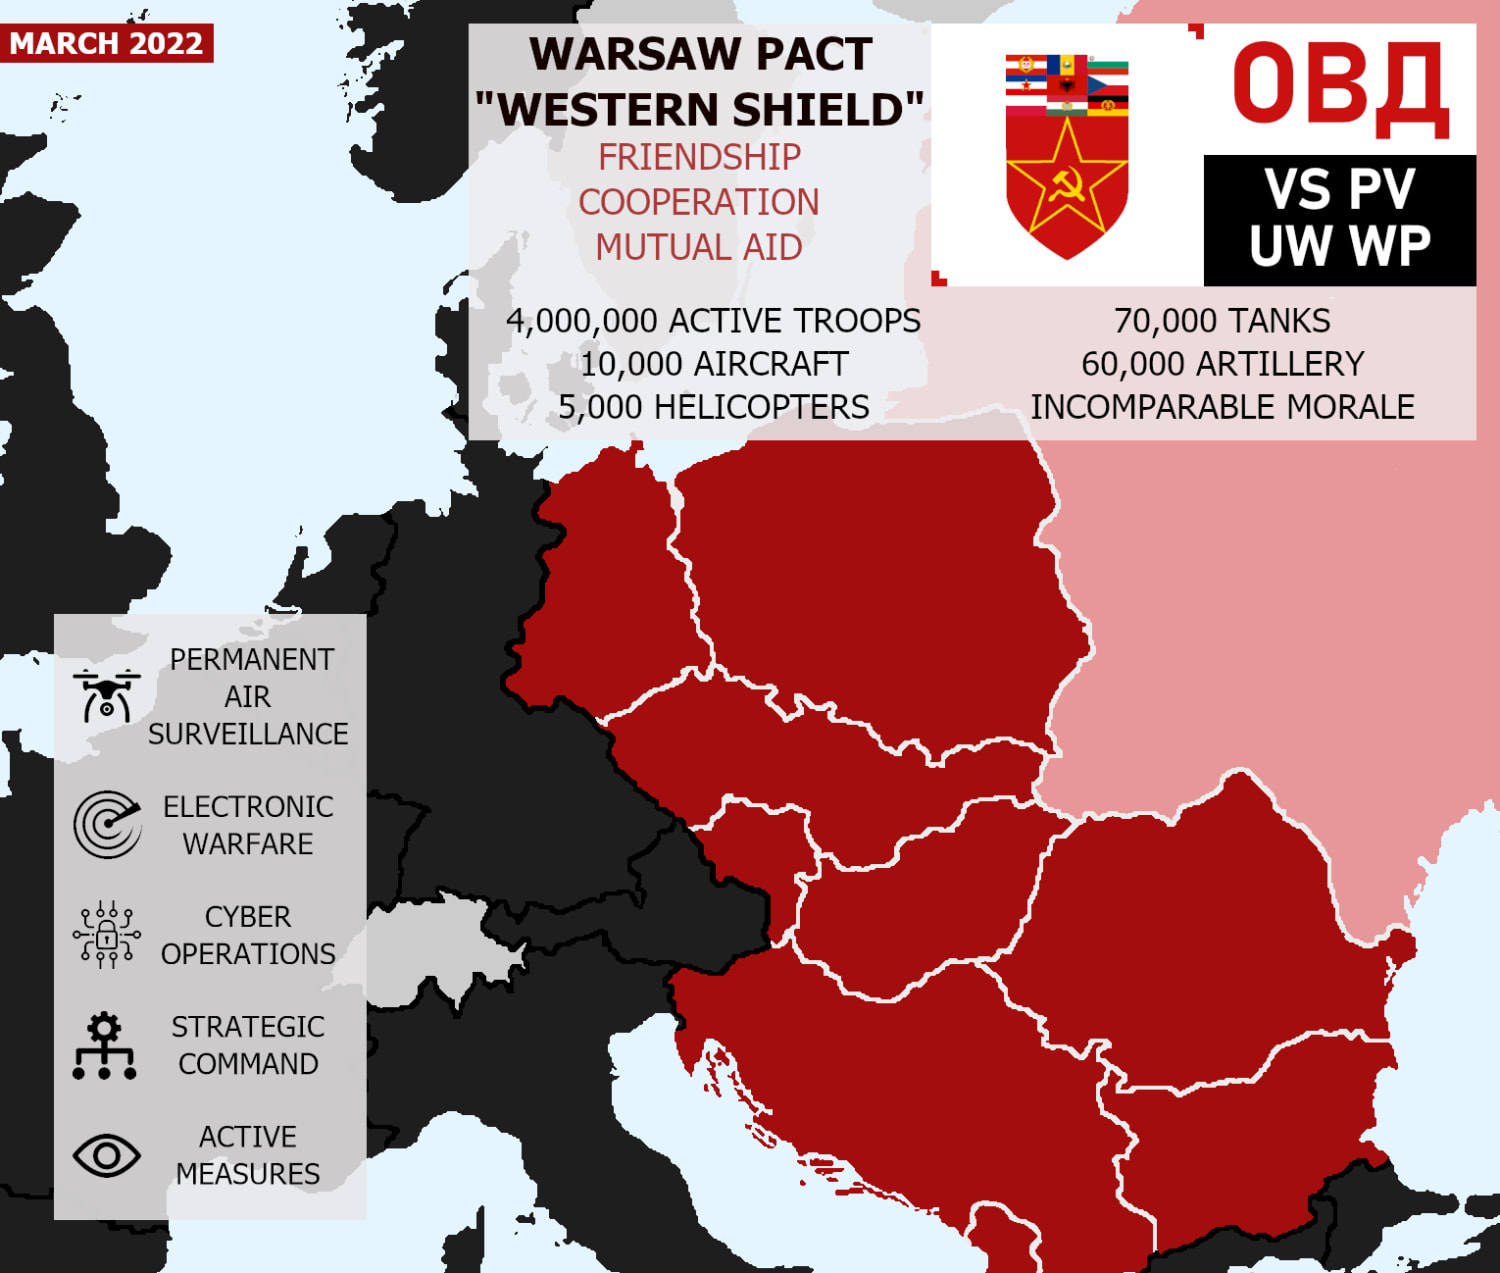 Warsaw Pact "Western Shield" Infographic - March 2022